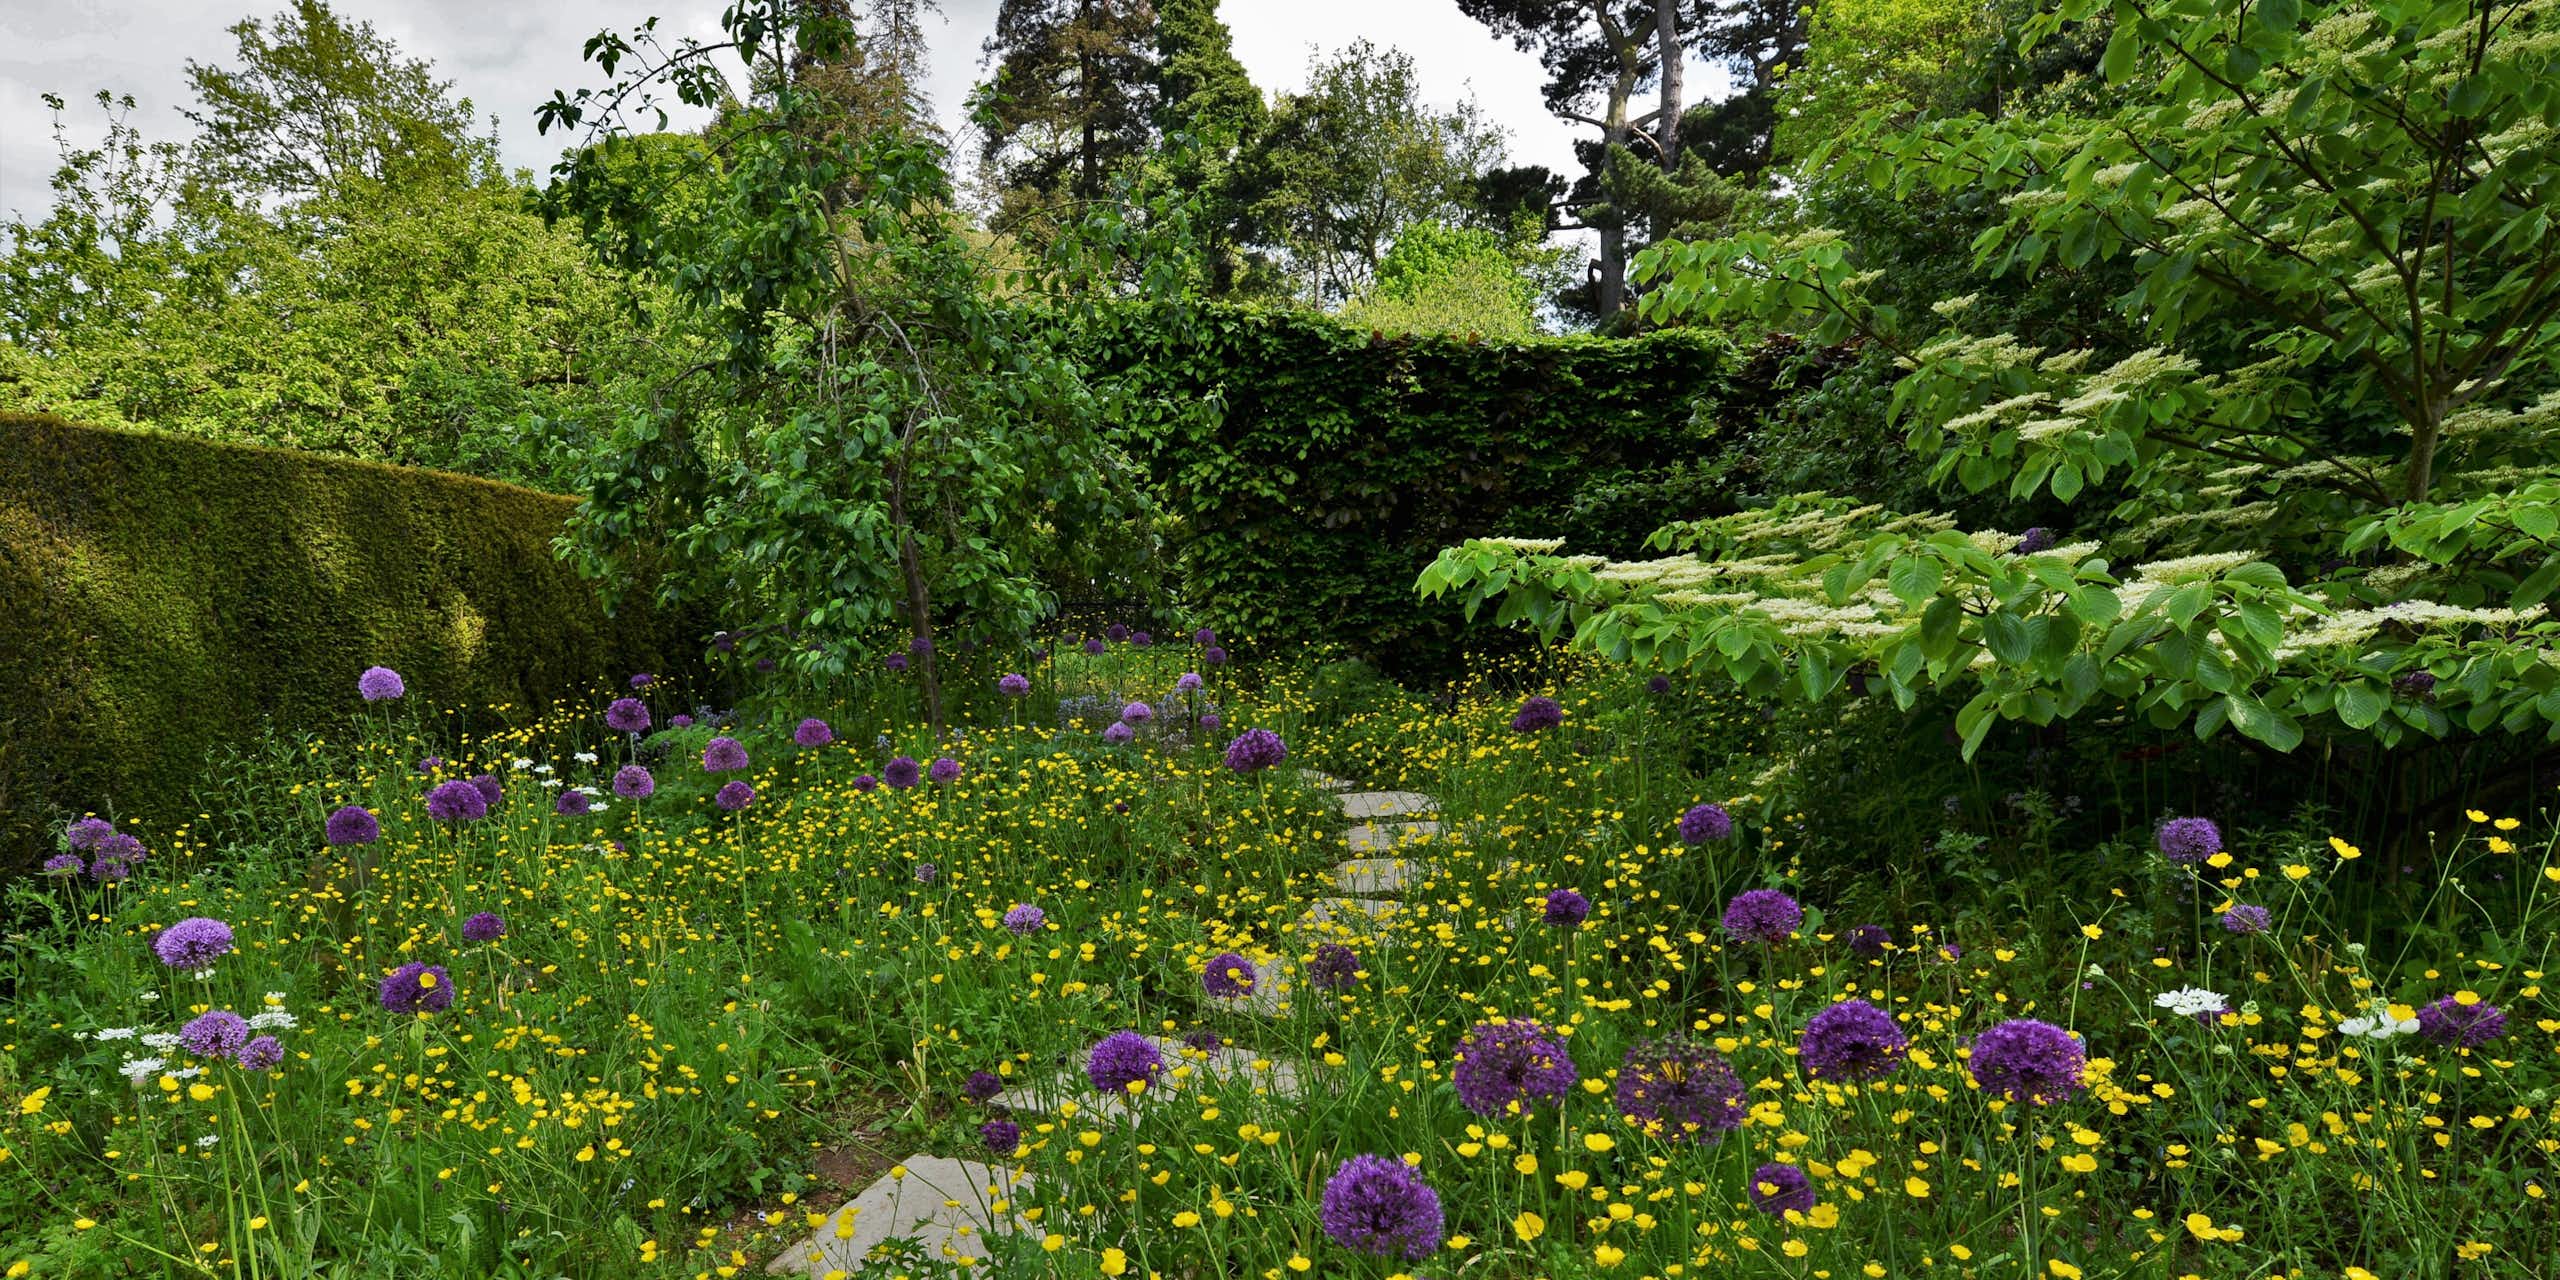 A garden with trees and wildflowers.